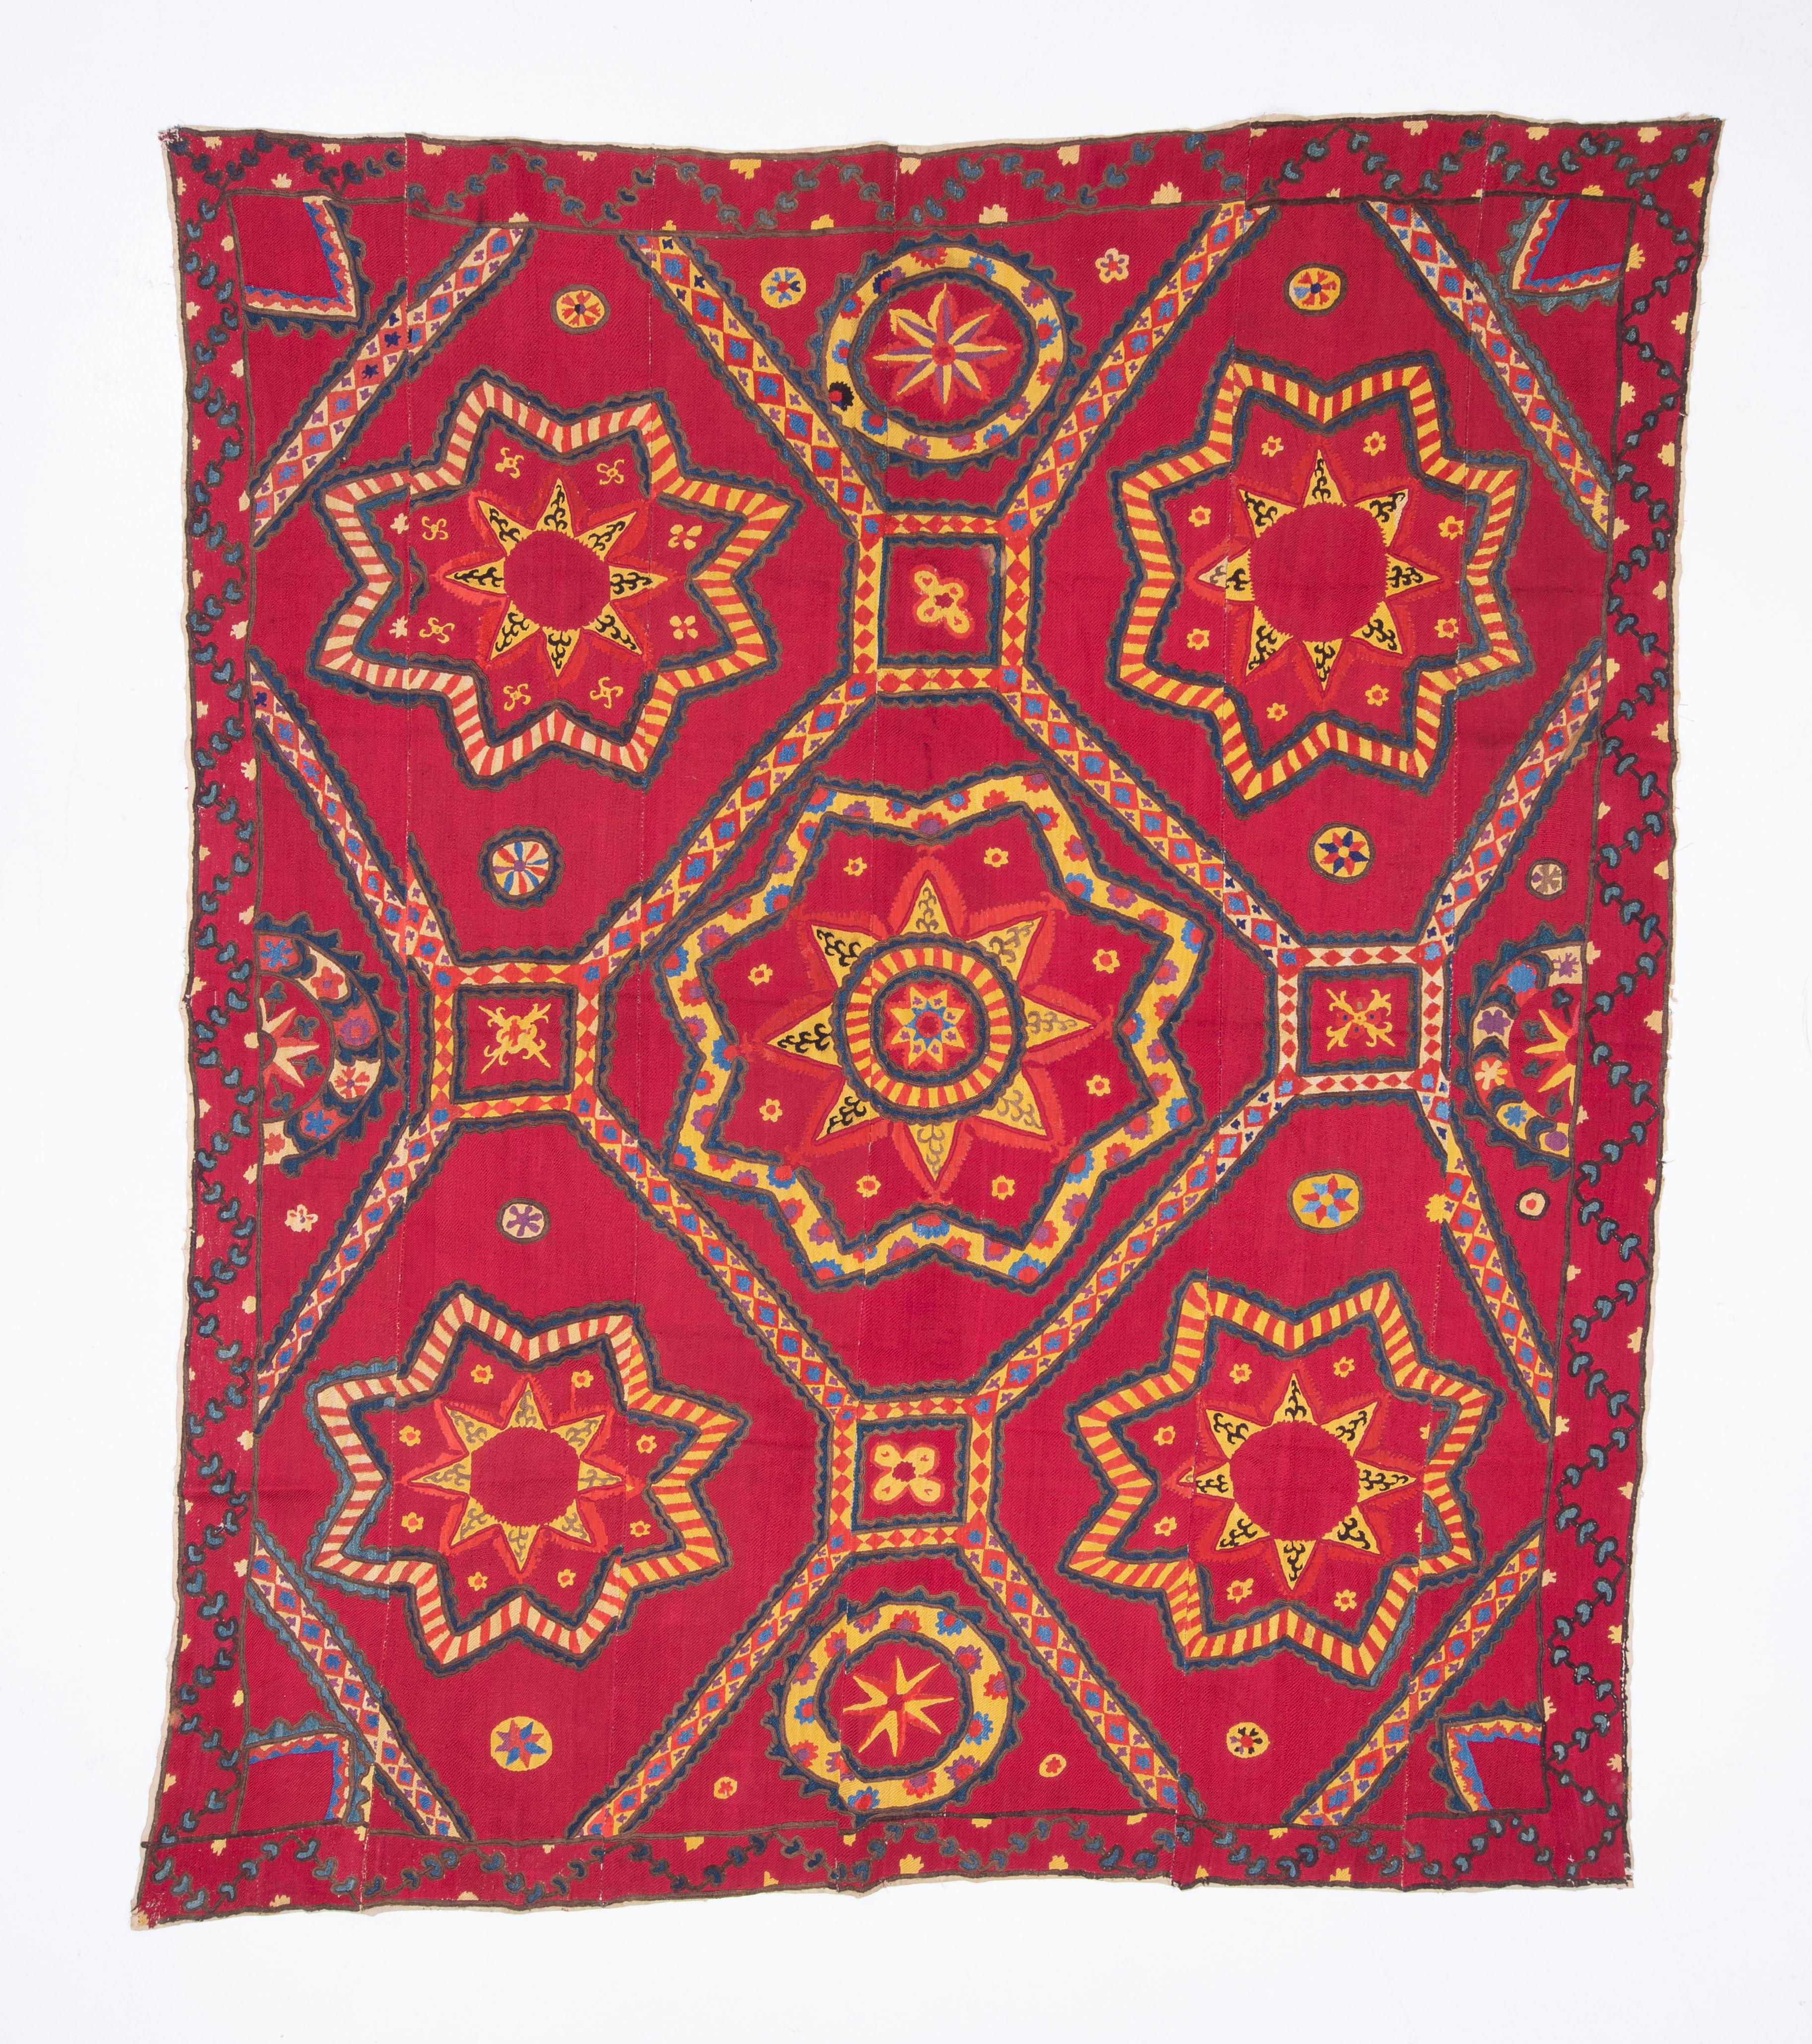 Suzanis from the regions of Tashkent and Pishkent have some astral names such az ‘moon sky’,
‘star sky ‘. The main characteristic of these suzanis is that of their being fully embroidered in silk and sometimes in wool in sections.
Ground cloth is